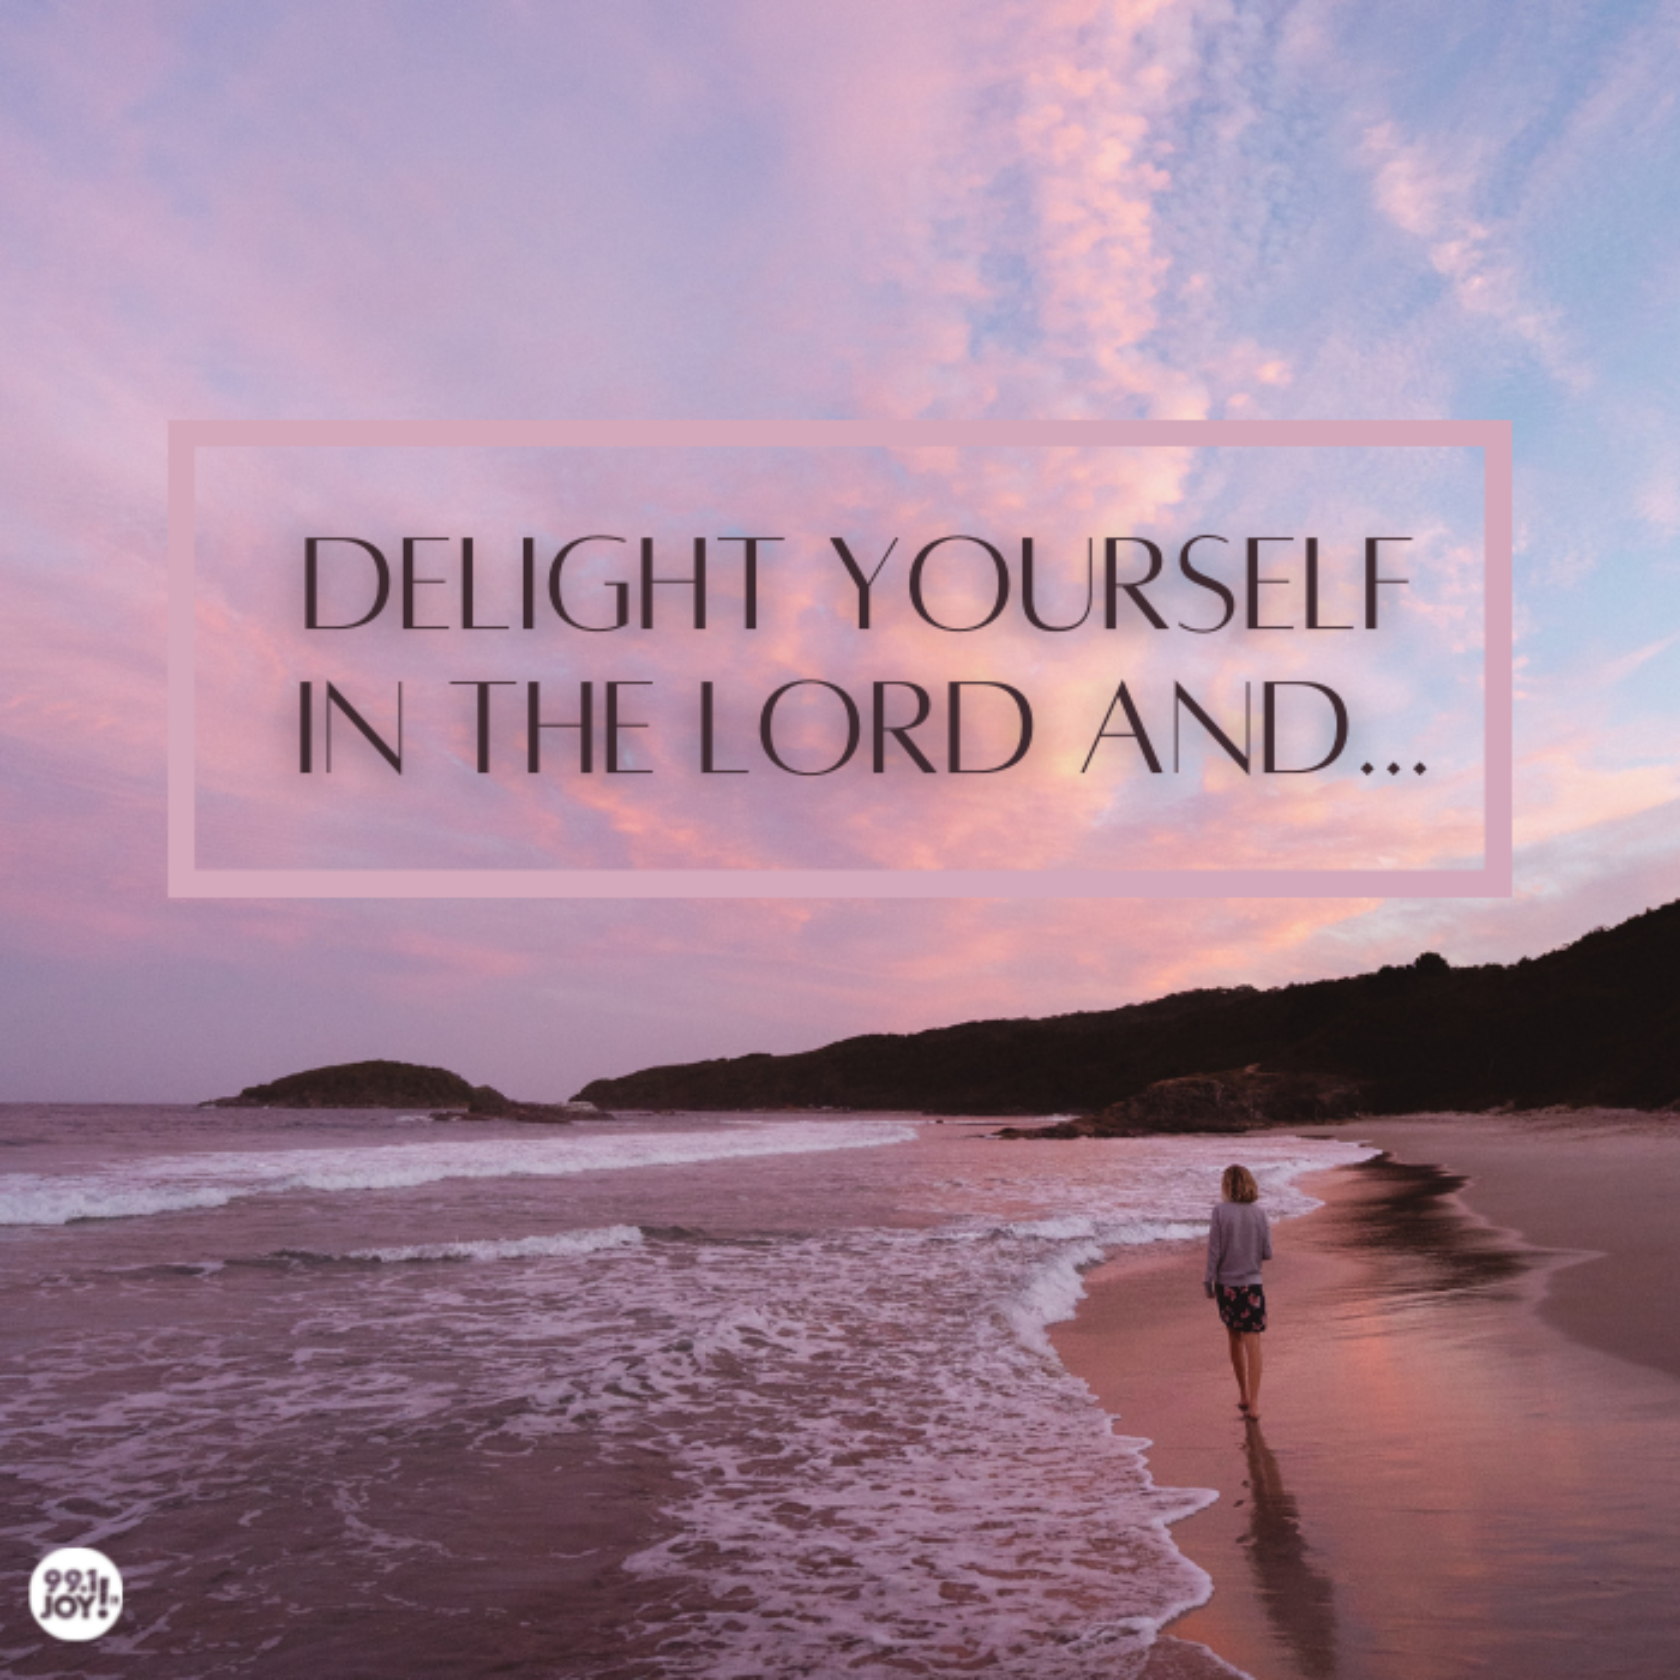 Delight Yourself In The Lord And…